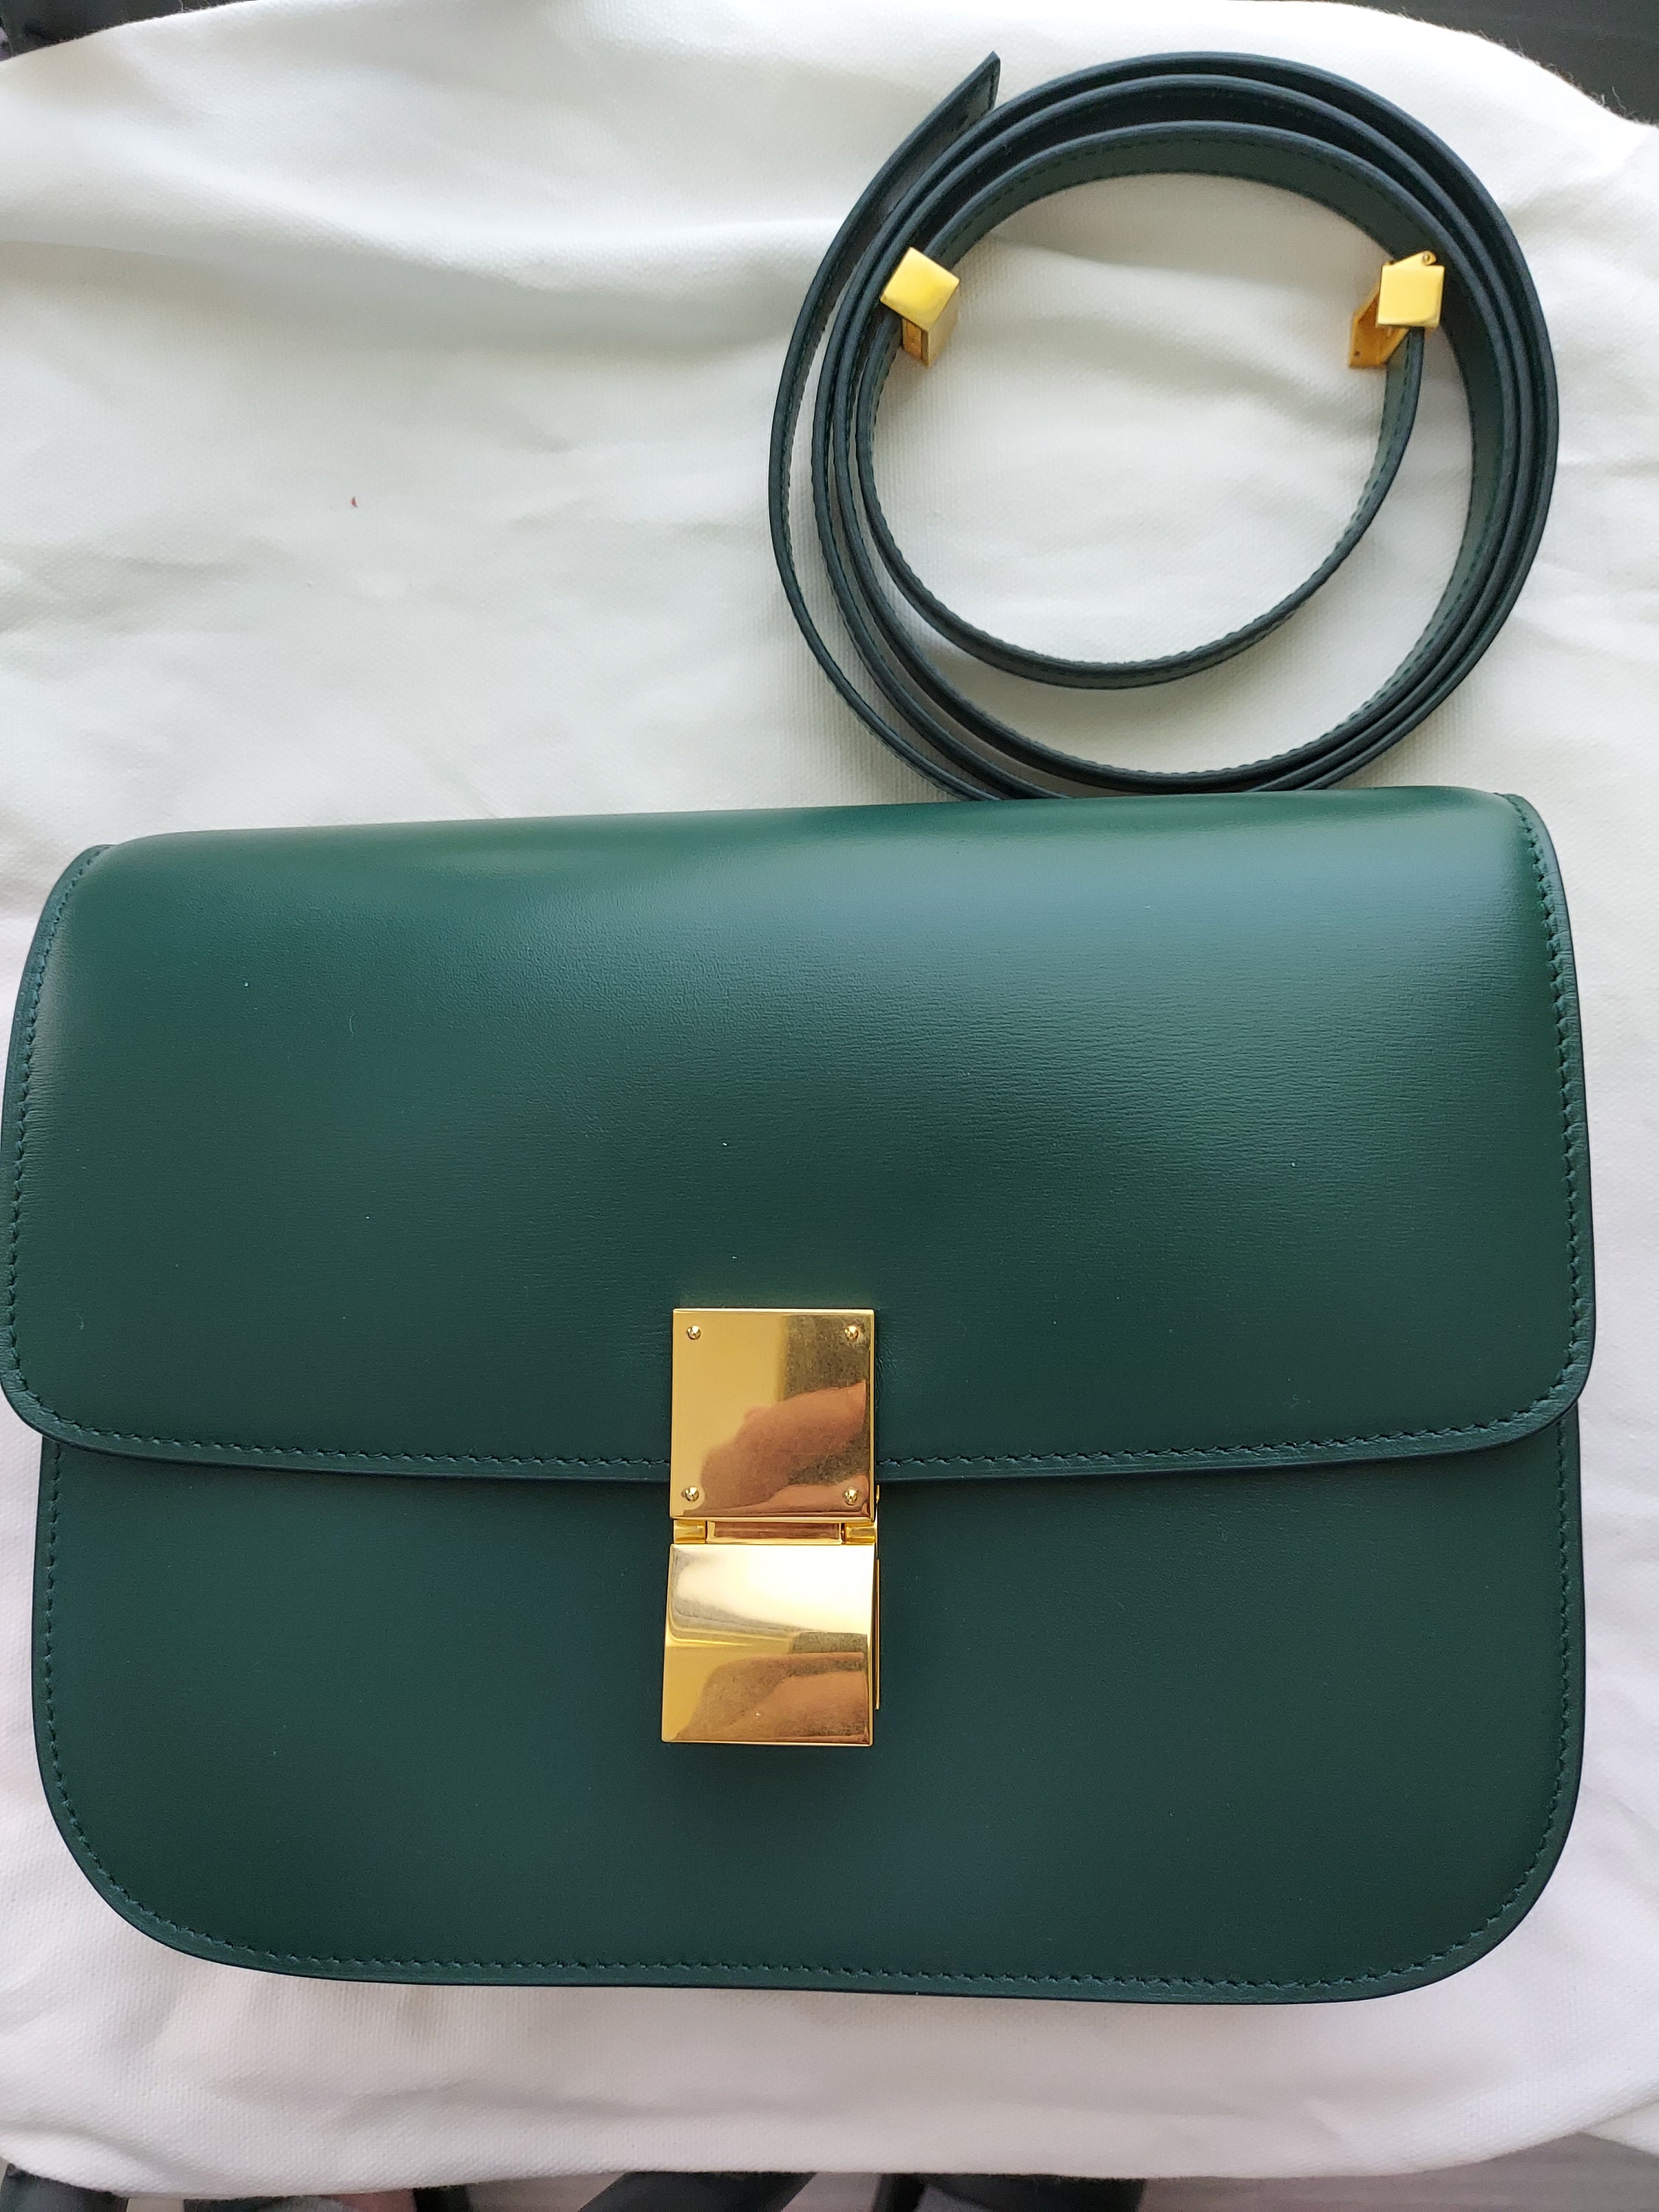 Celine Classic Box Bag Medium, Teal Grainy Leather with Gold Hardware,  Preowned in Box WA001